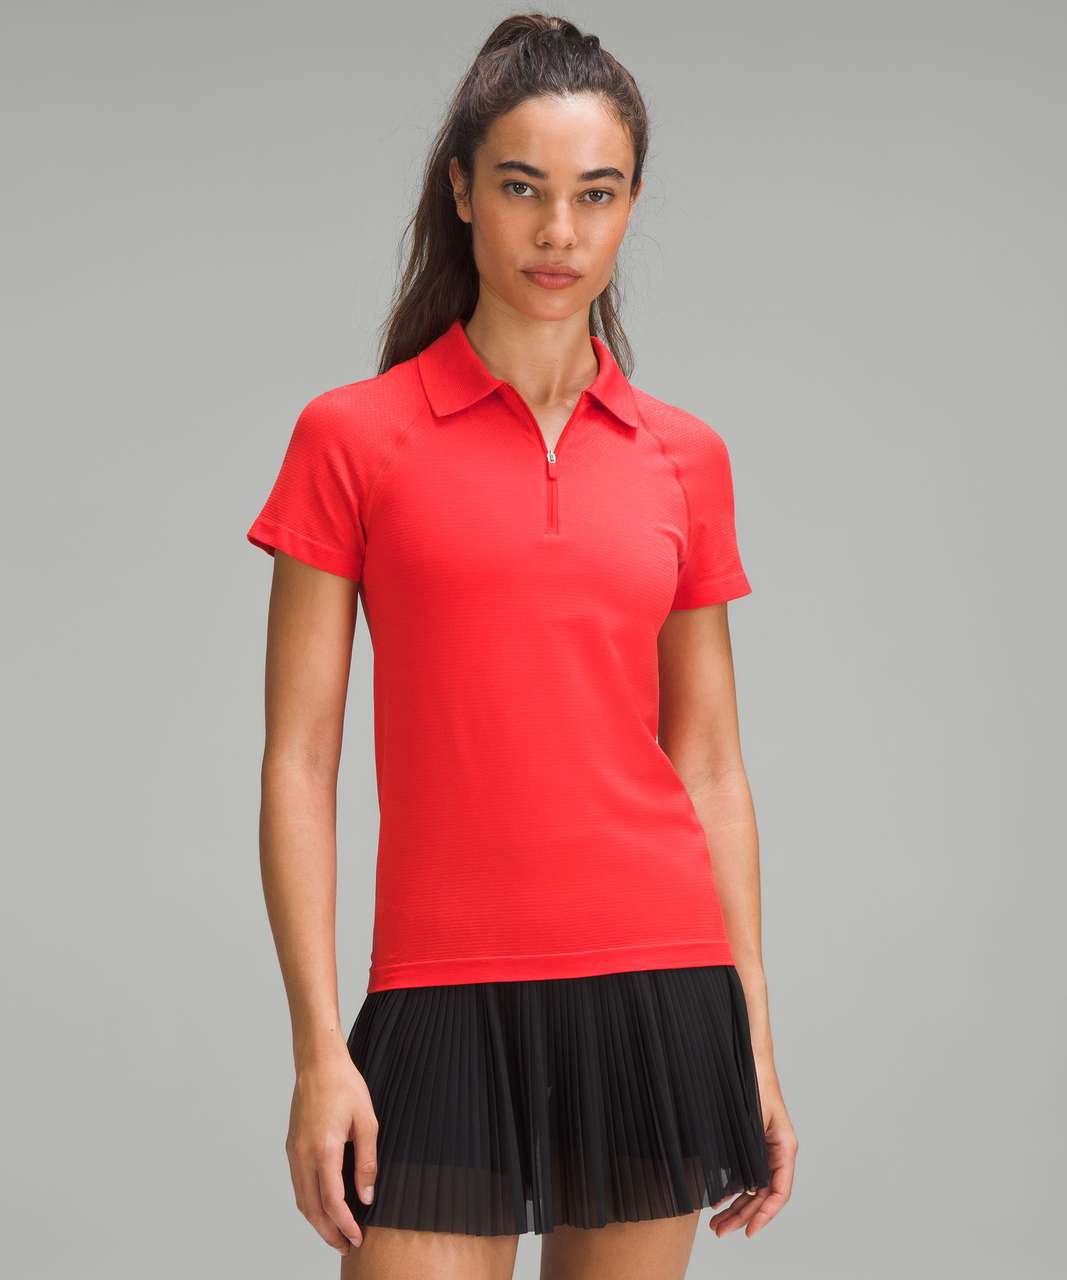 Lululemon Swiftly Tech Relaxed-Fit Polo Shirt Size 10 Cropped Hot Heat Red  Glow